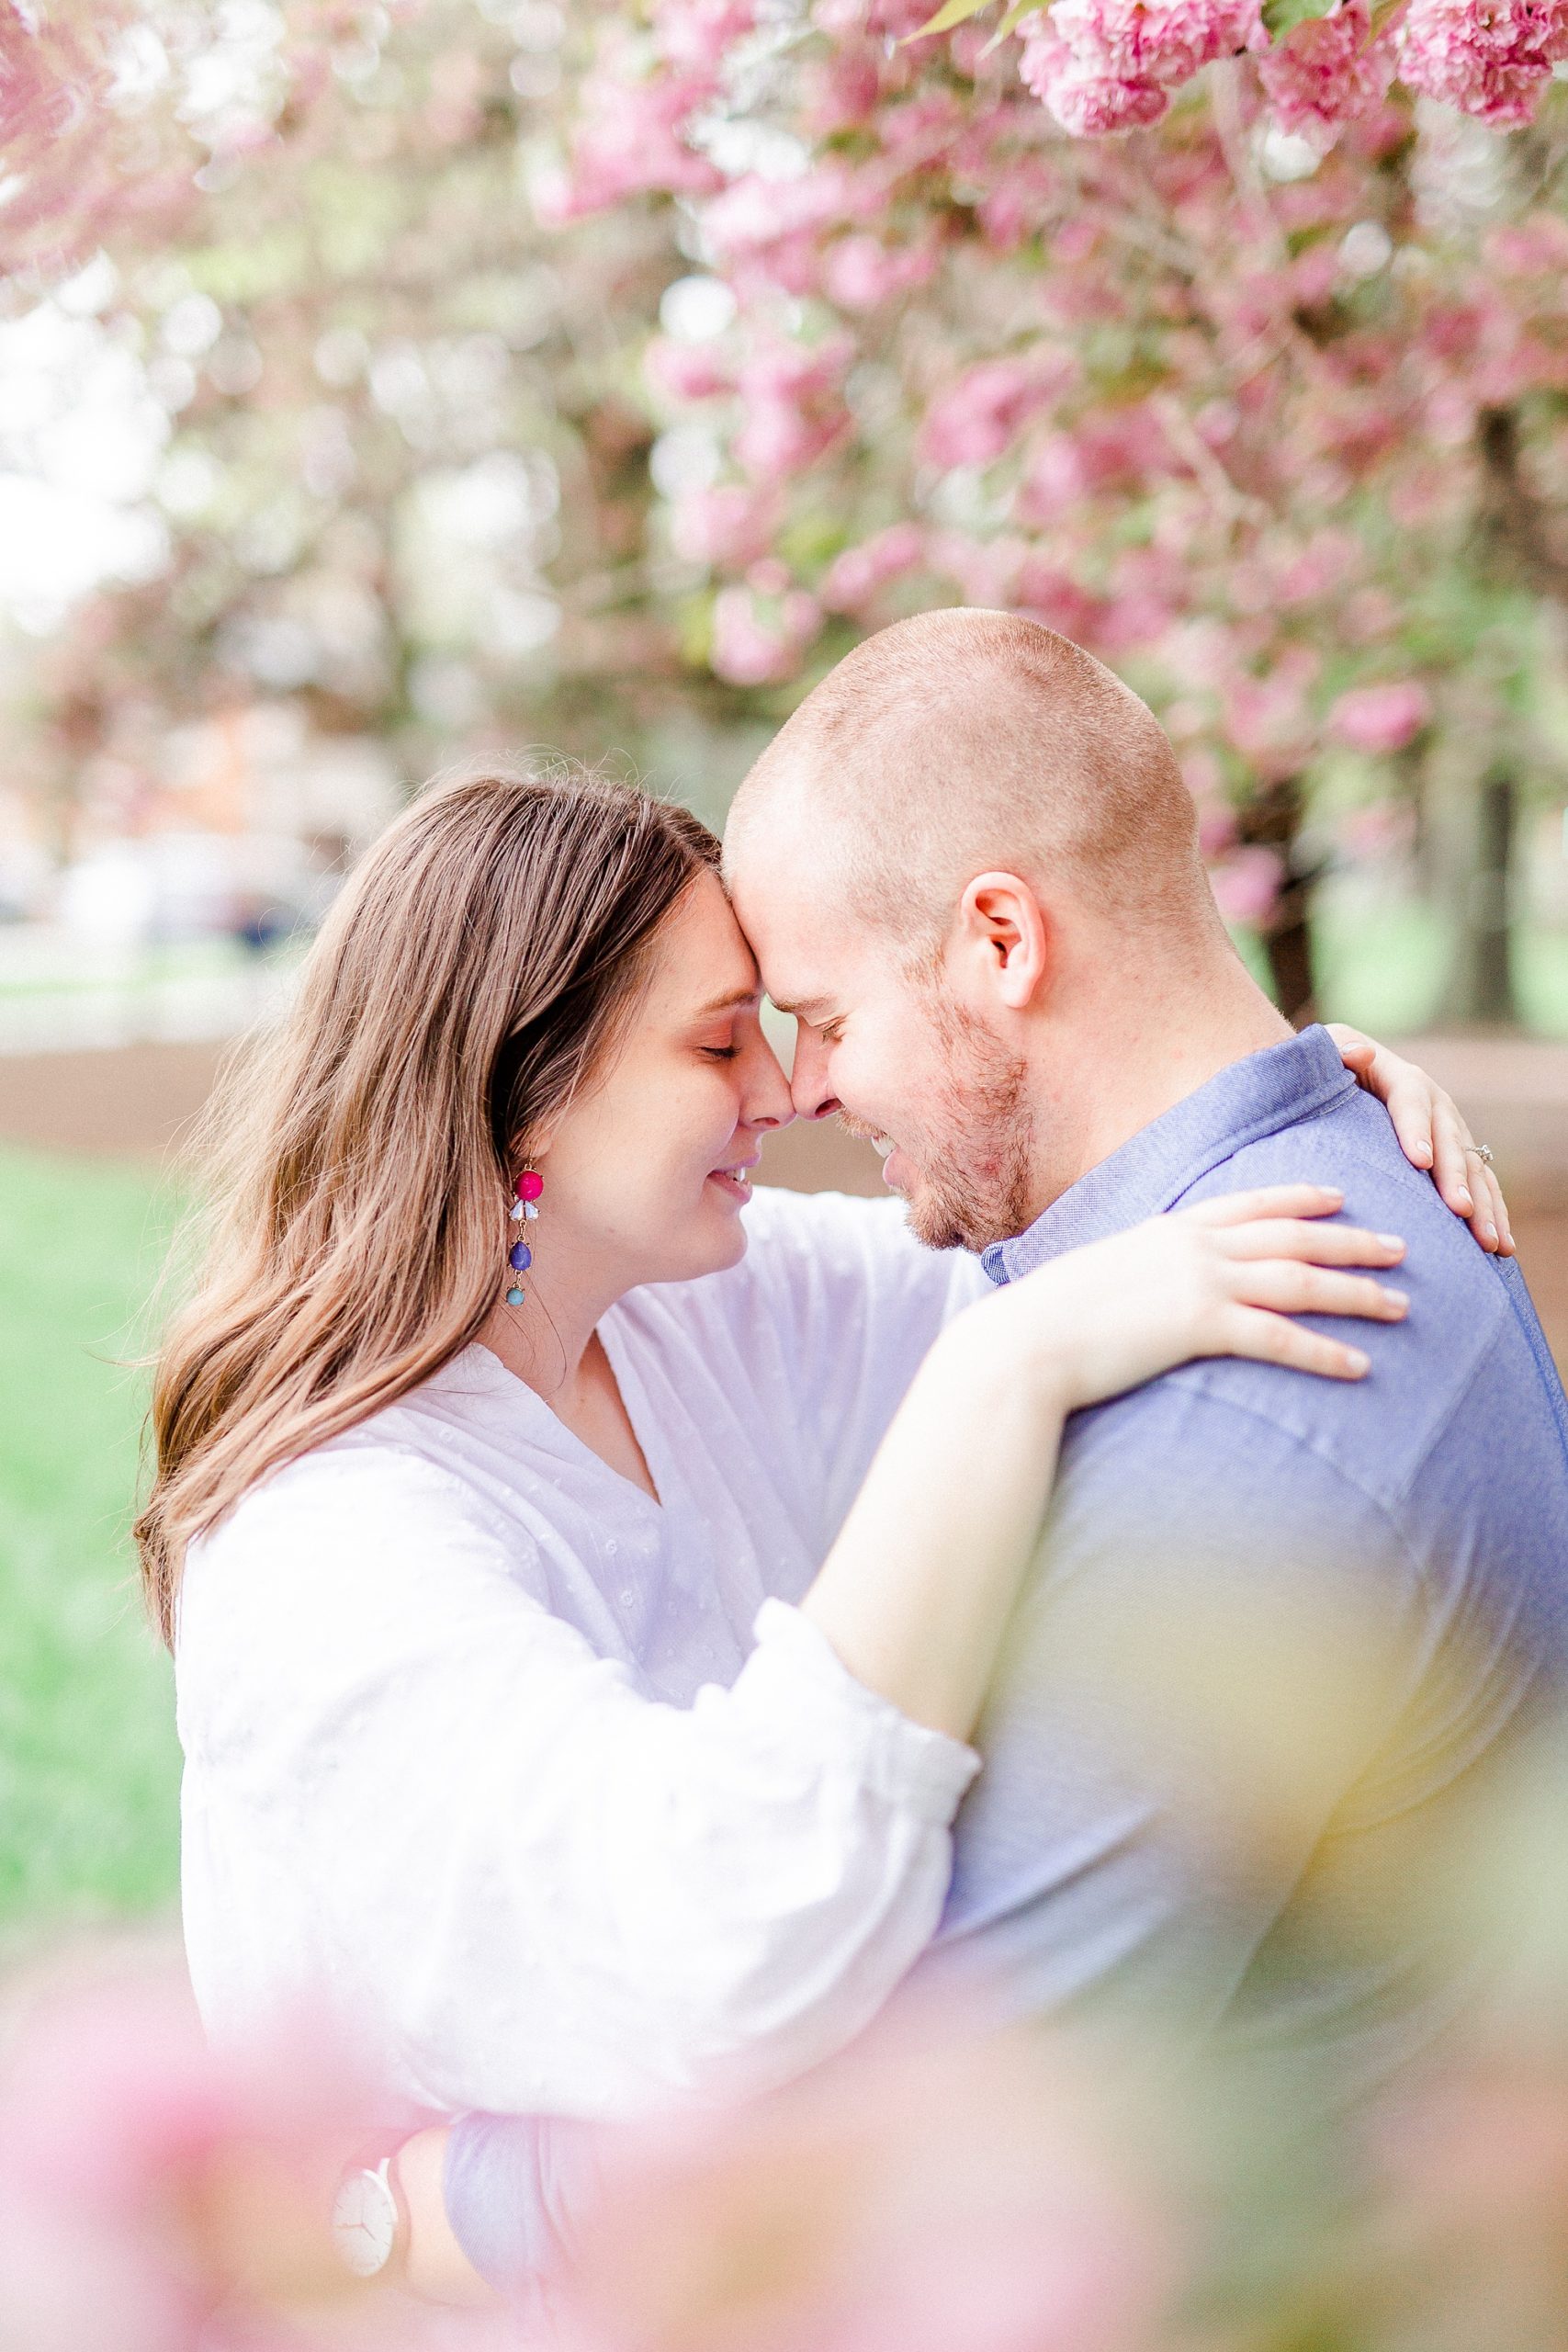 Downtown Davidson NC engagement portraits in cherry blossom tree